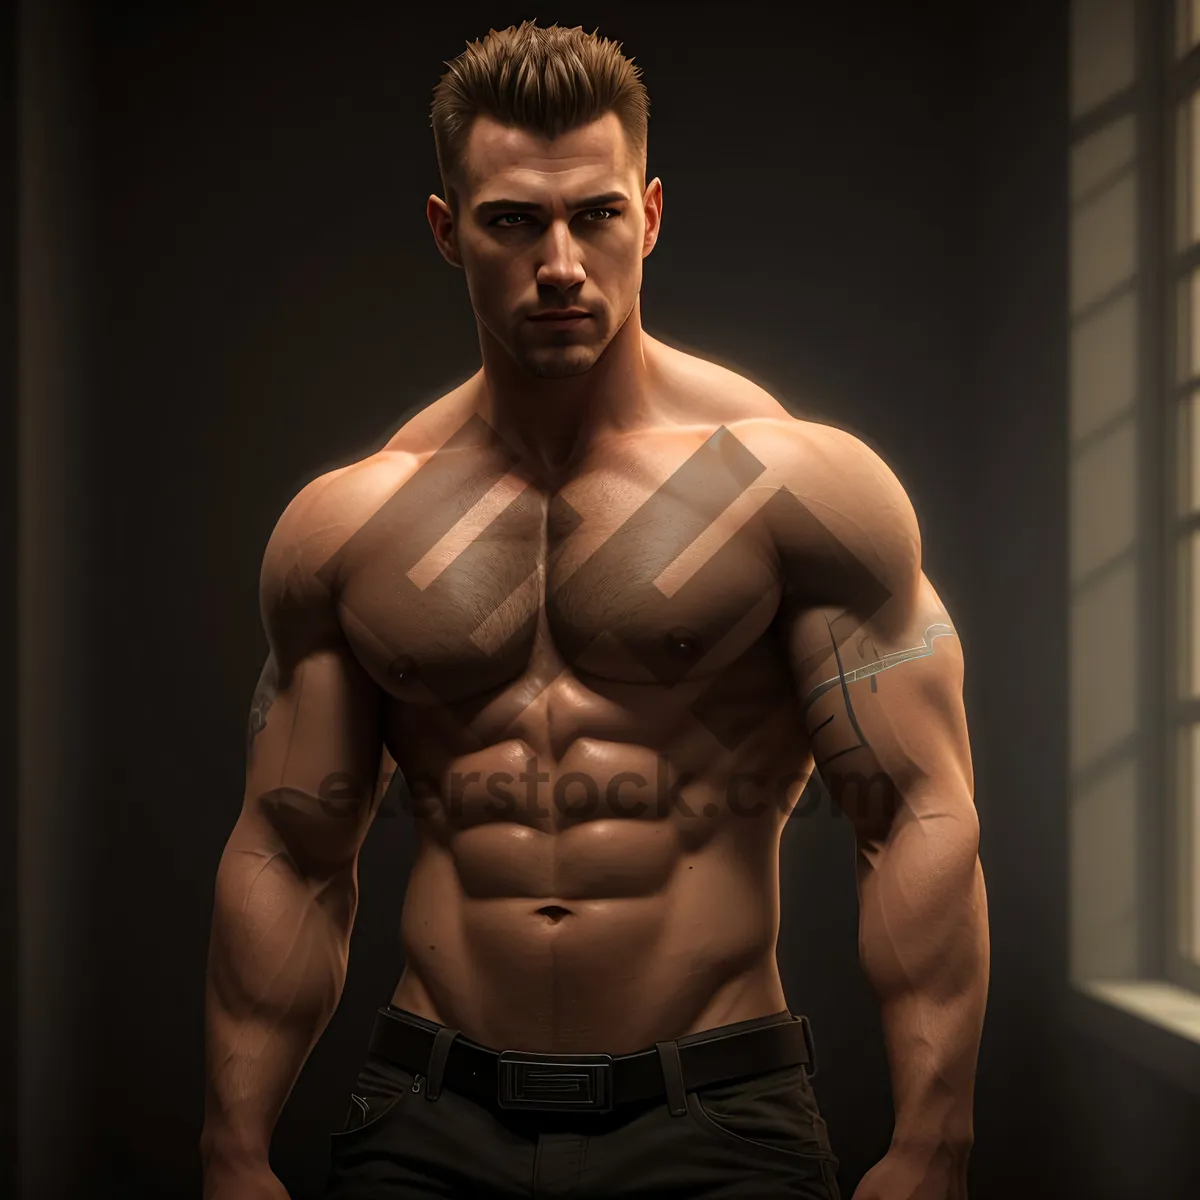 Picture of Powerful Male Bodybuilder Flexing Muscles